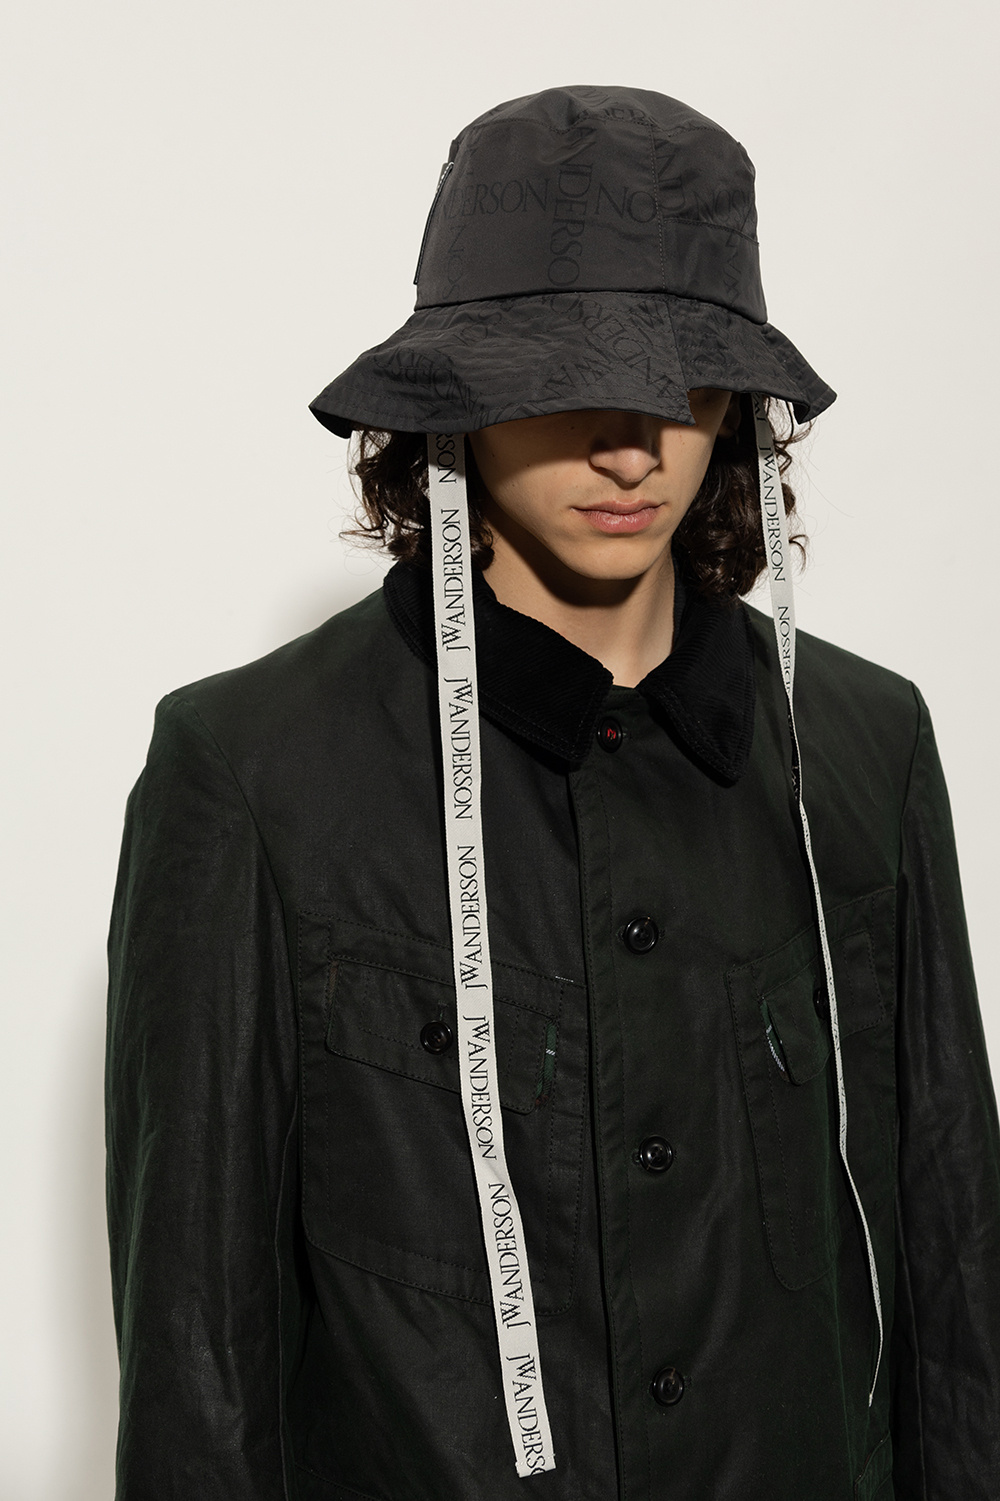 JW Anderson Bucket hat Elevated with logo